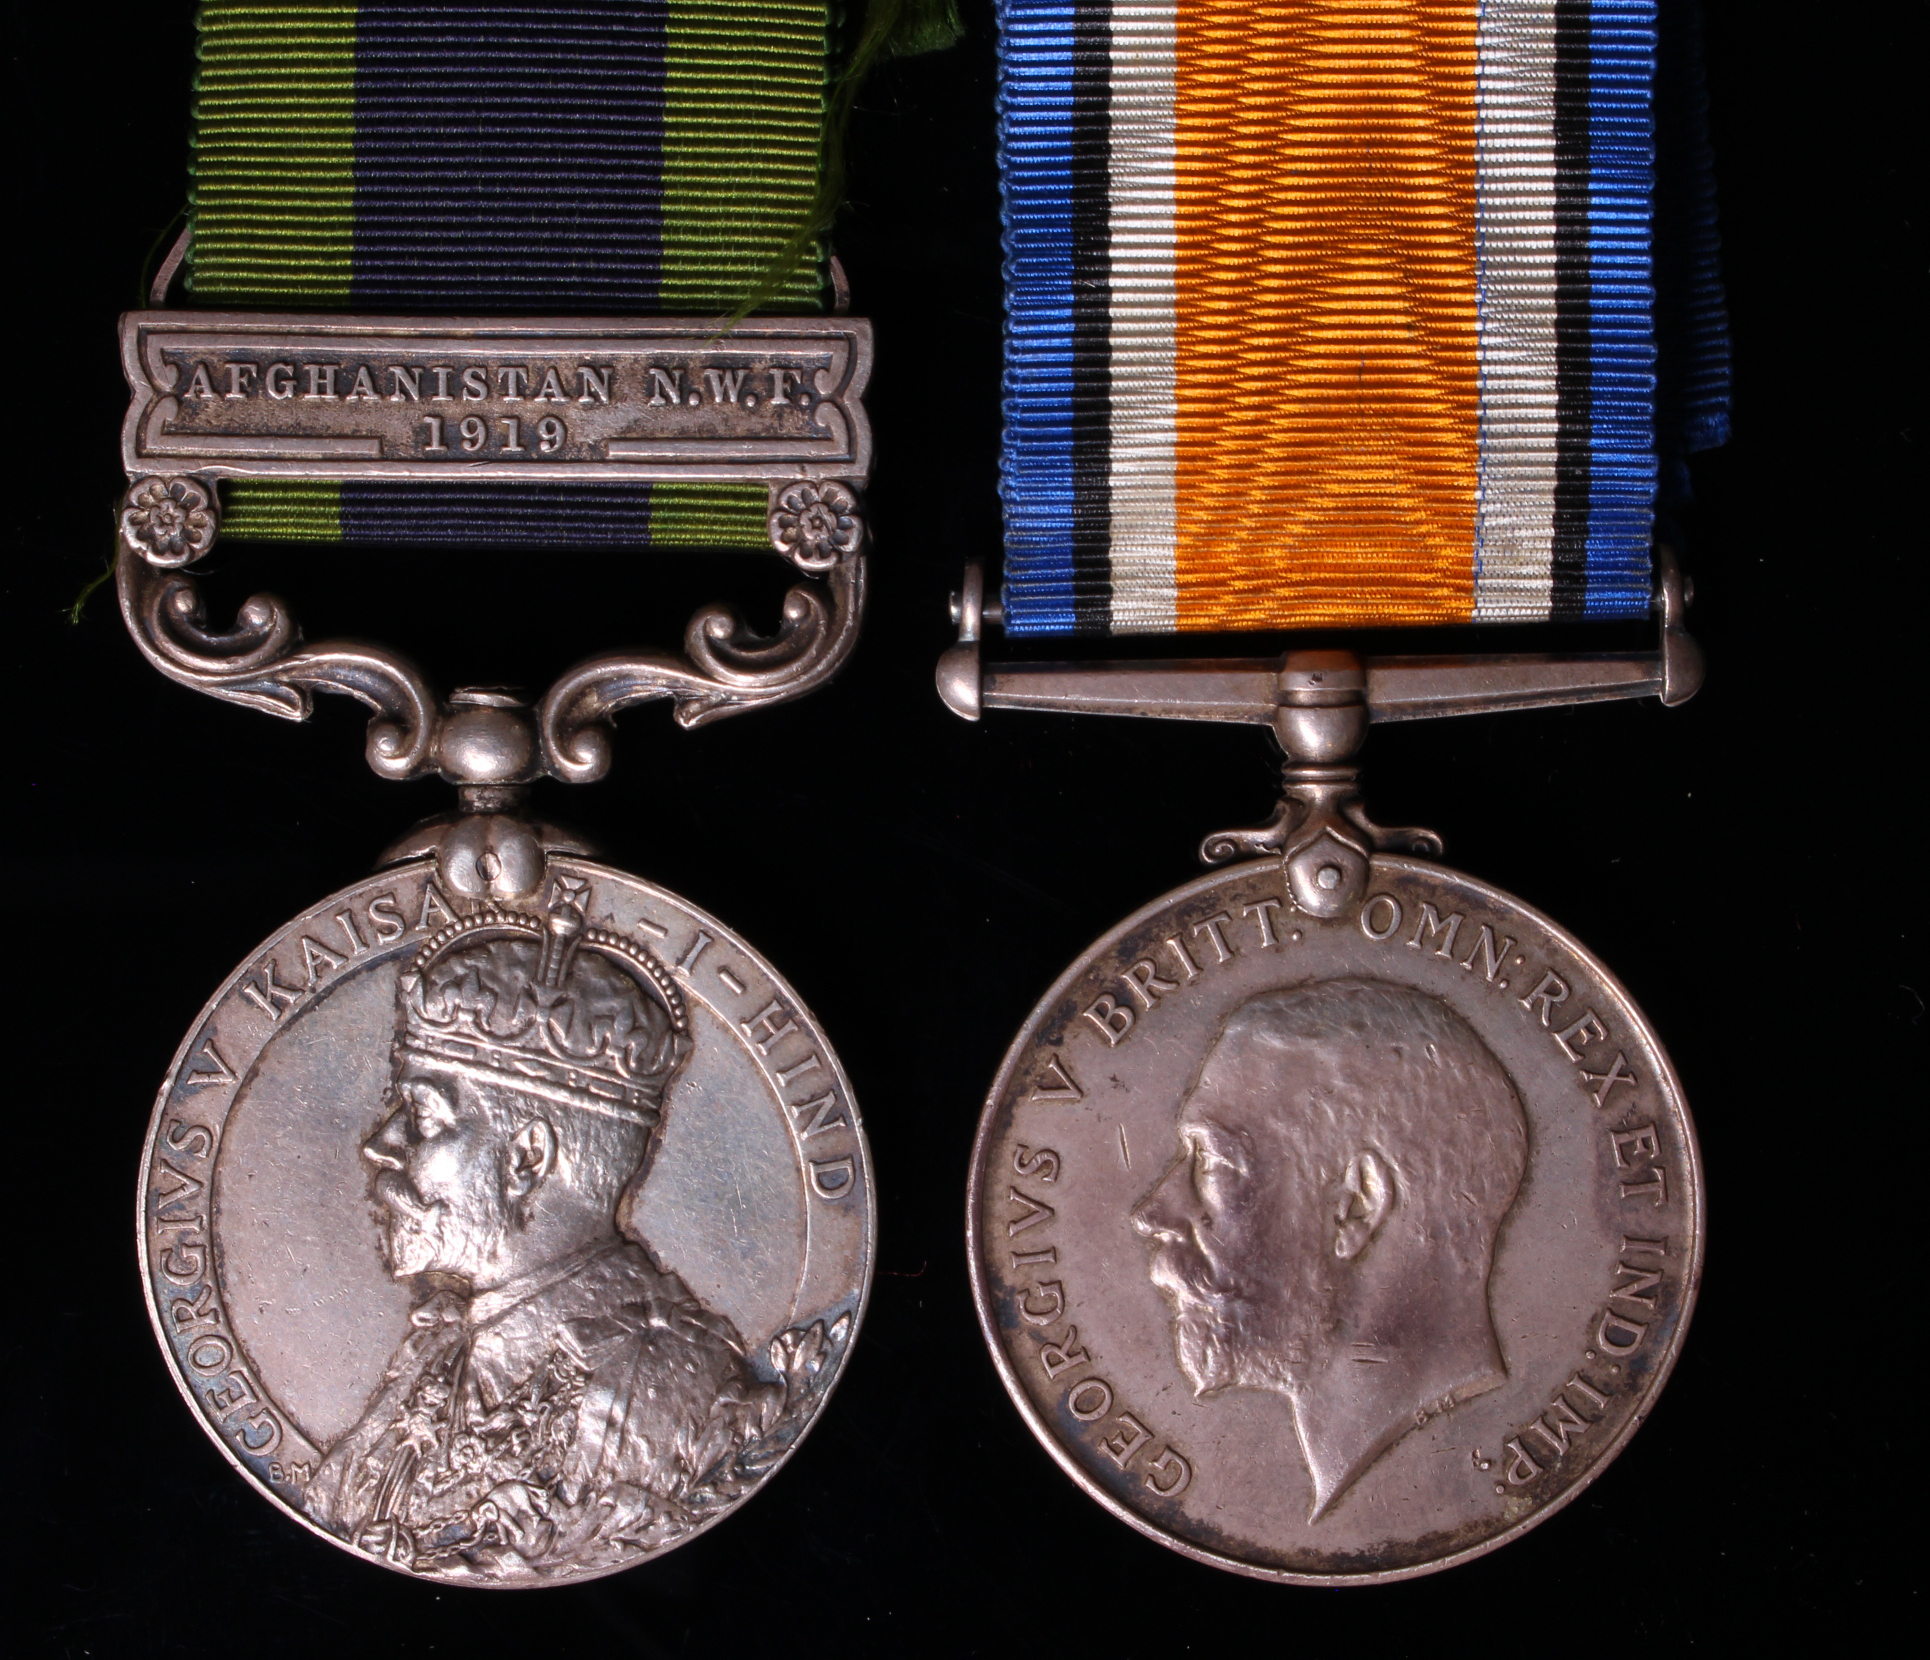 BWM (9088 Pte E G Wilkey Som L.I.) and IGS GV with Afghanistan N.W.F. 1919 clasp (9088 Pte E